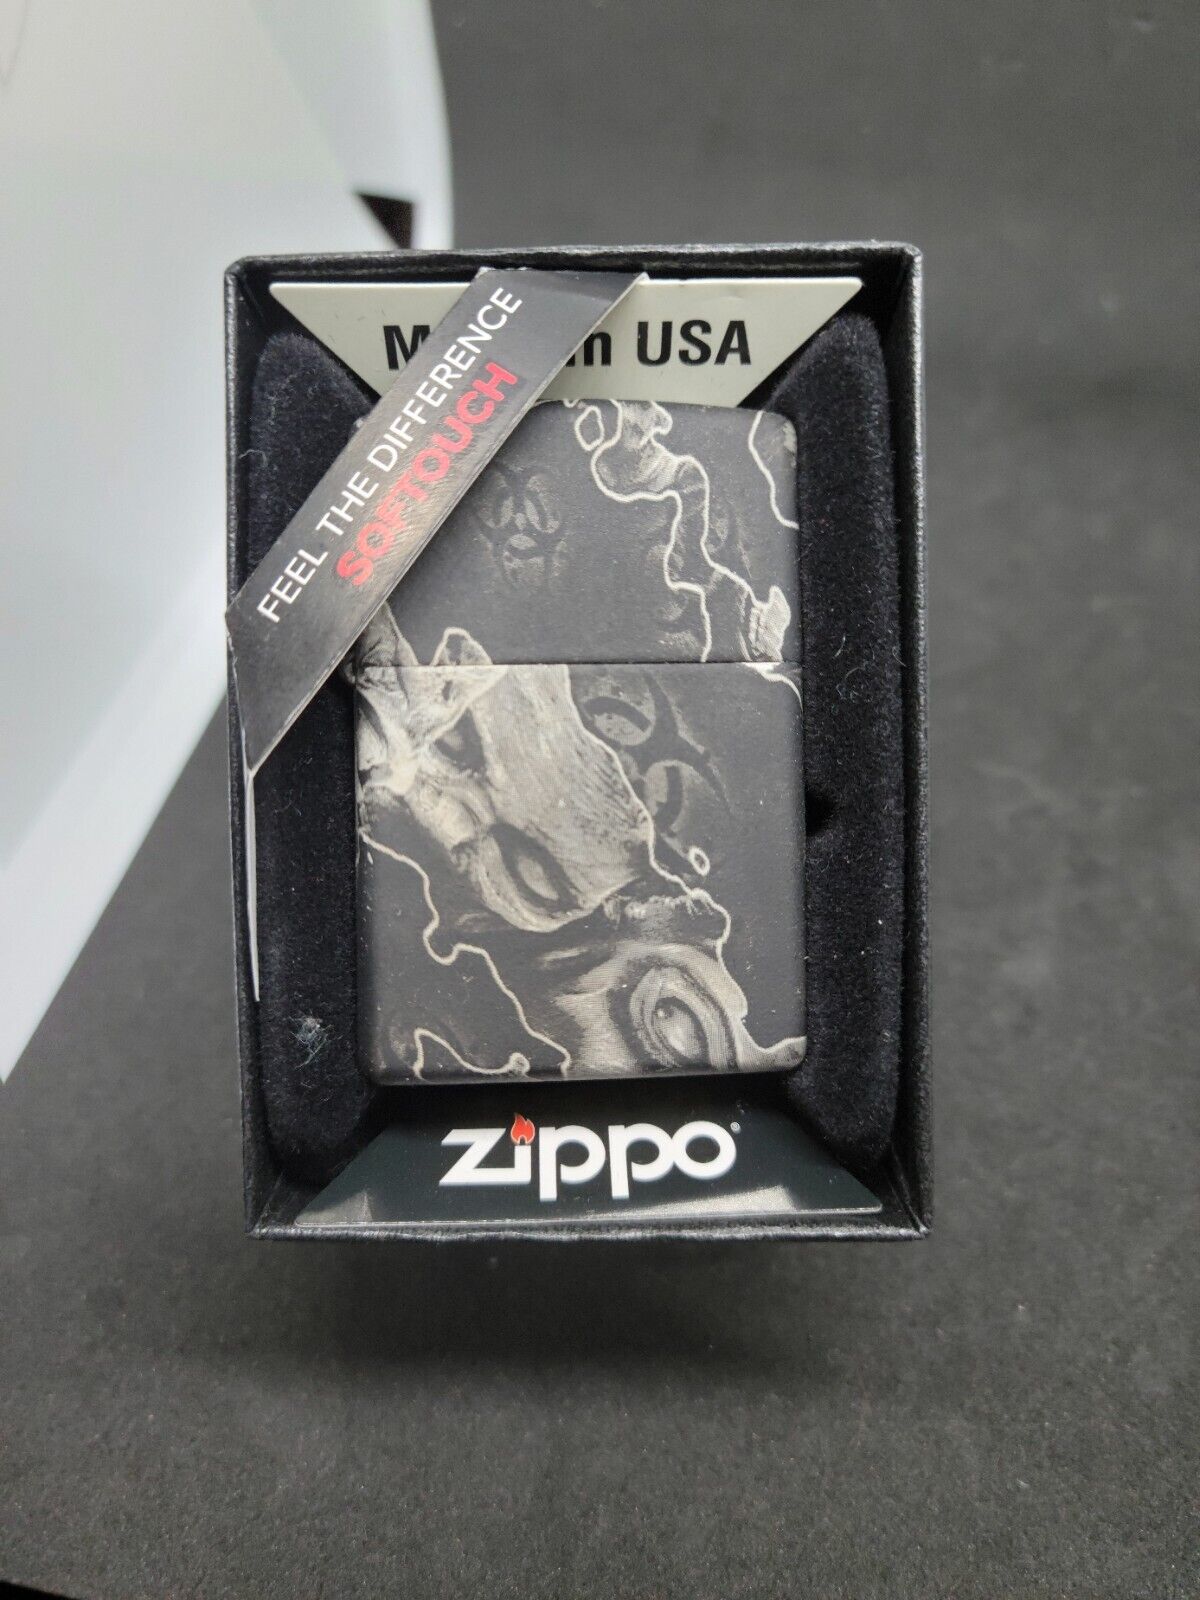 ZIPPO “FEEL THE DIFFERENCE” SOFTOUCH Zombies 540 LIGHTER NEW IN BOX